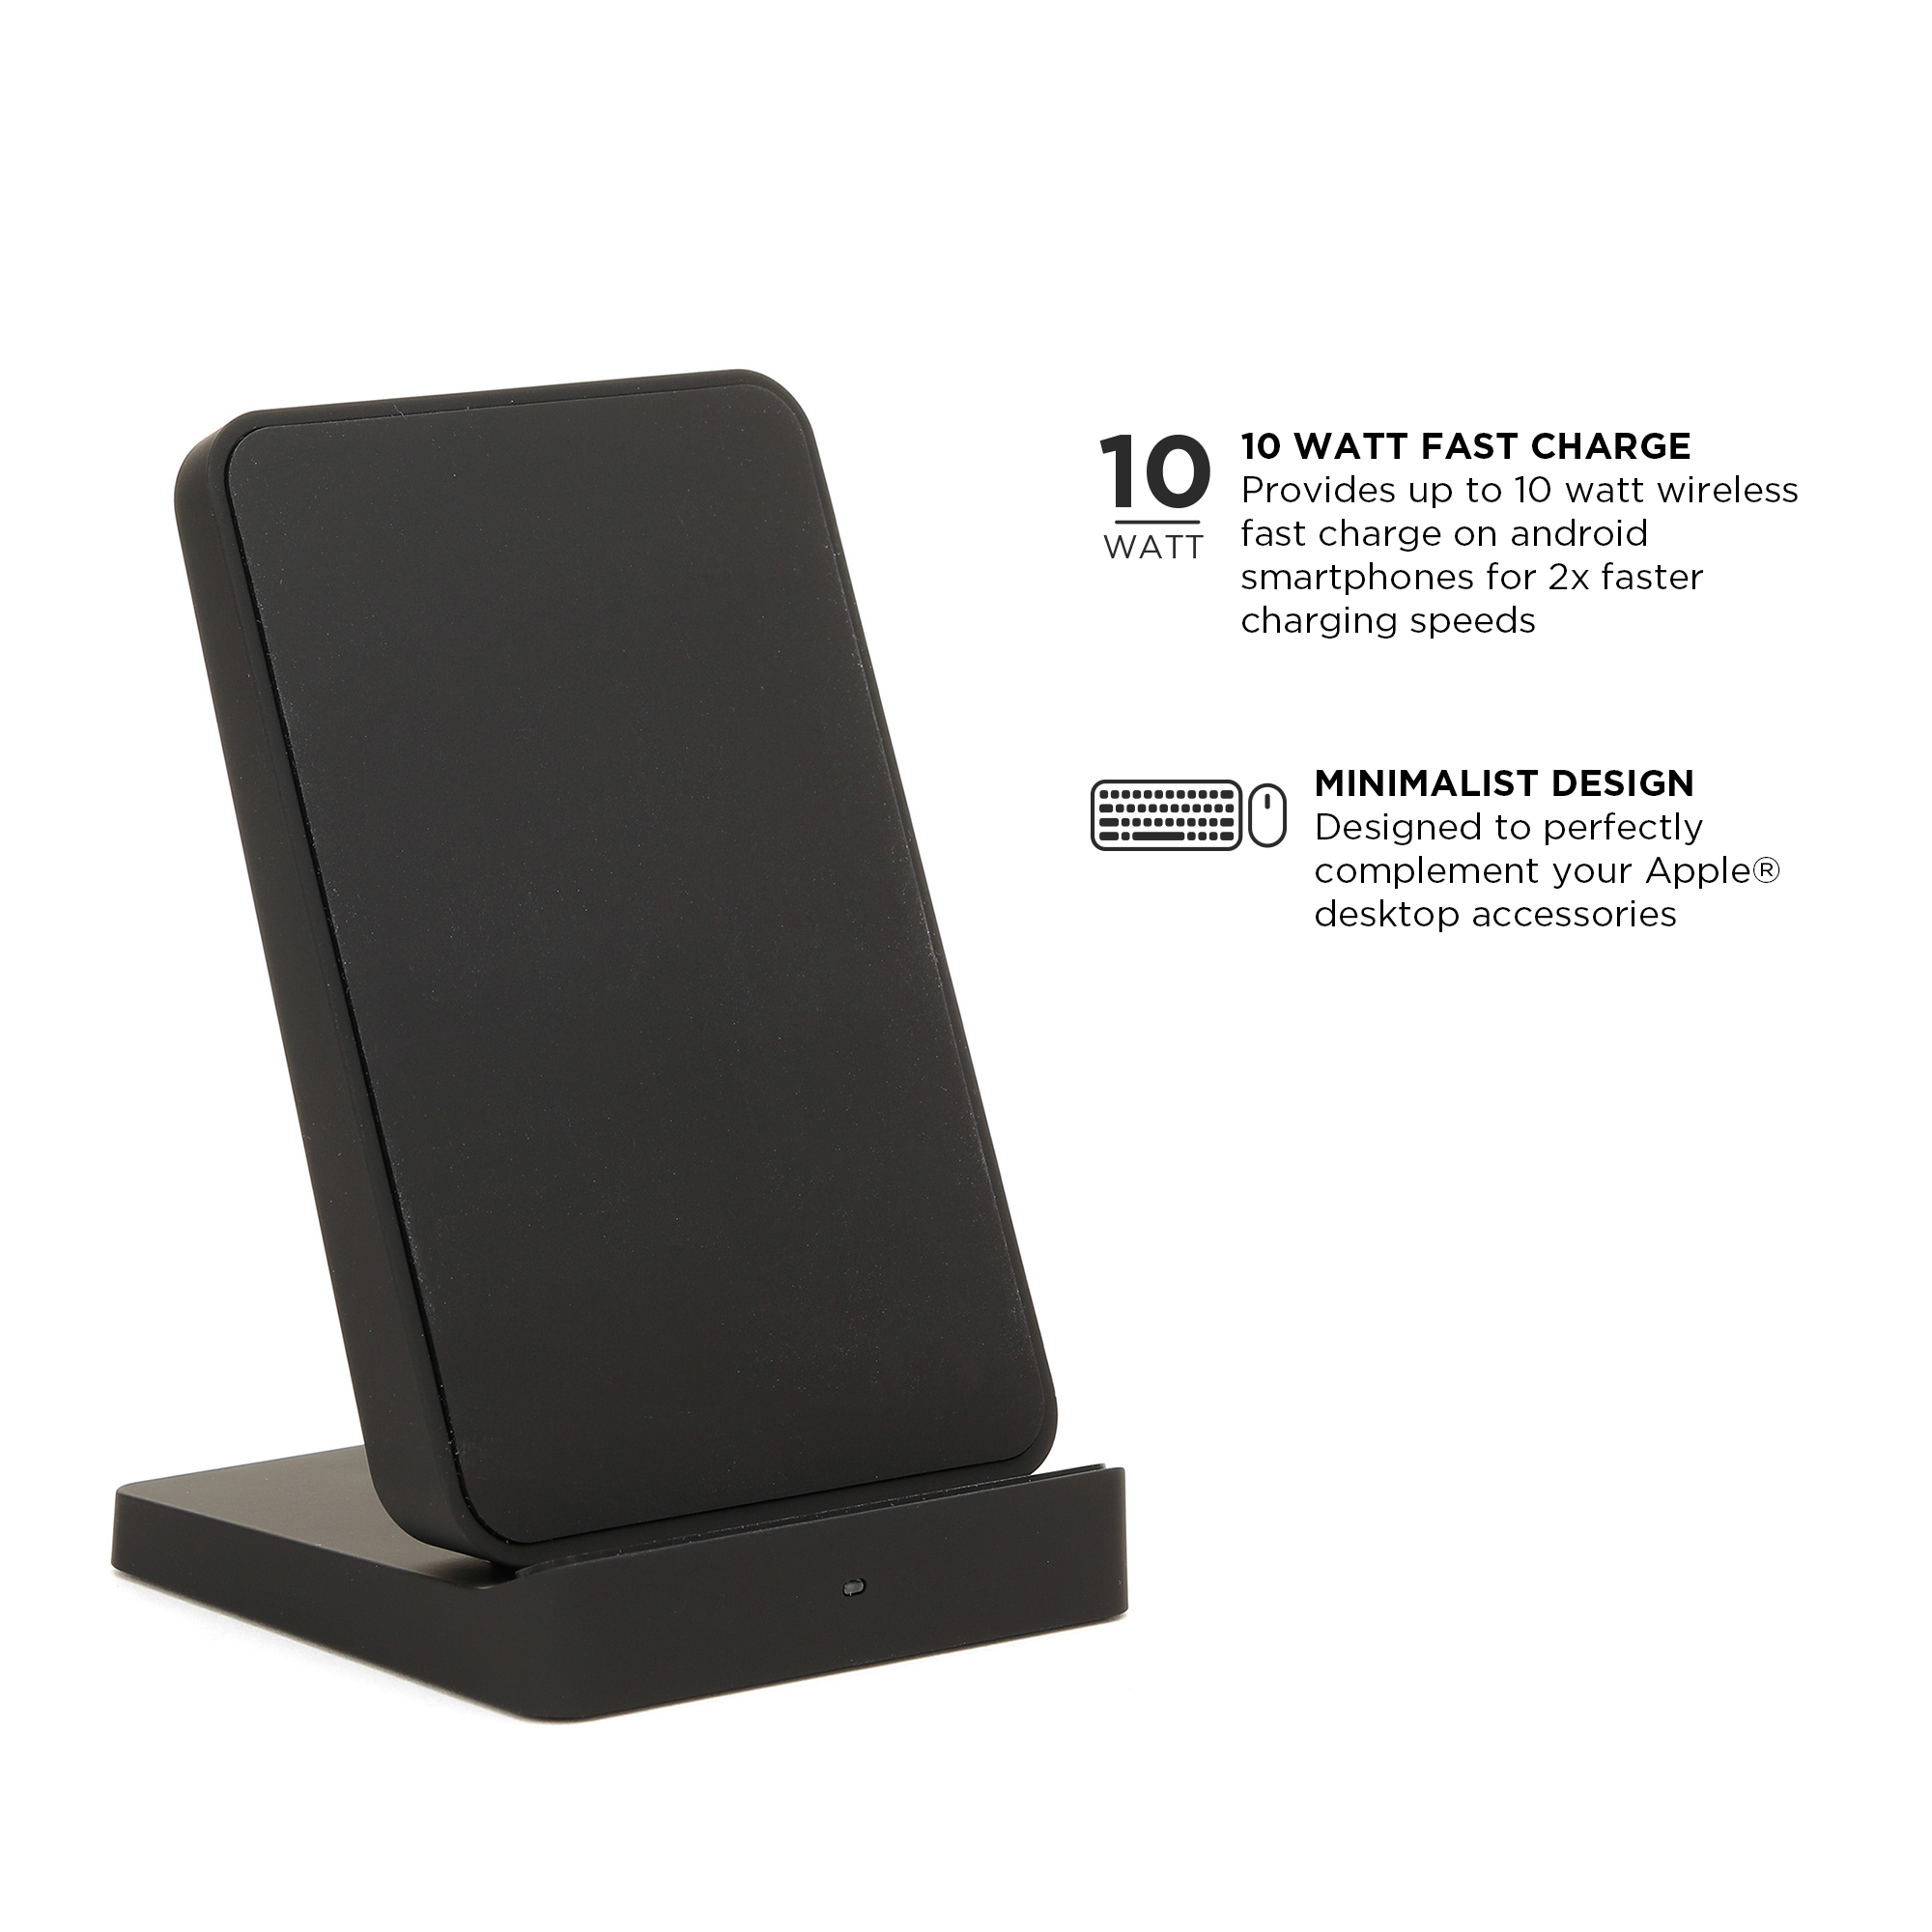 iHome Wireless Charging Stand: Qi Certified Fast Charge Station: 7.5W for iPhone 11, 11 Pro, 11 Pro Max, XR, Xs Max, XS, X, 8, 8 Plus, or 10W Galaxy S10 S9, Note 10 Note 9 - image 2 of 3